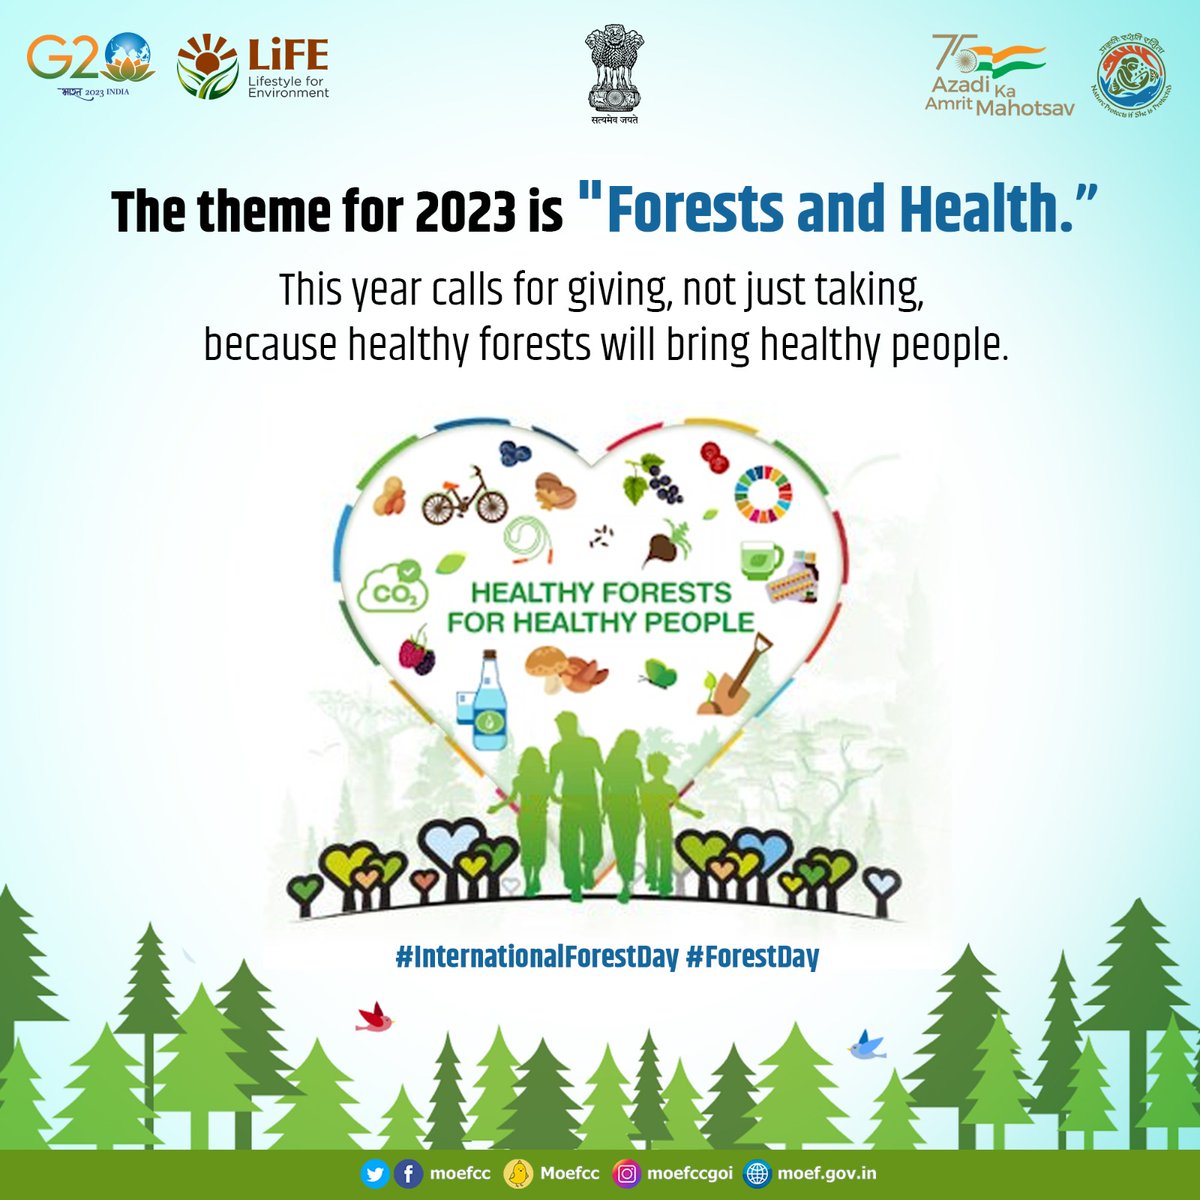 The theme for #InternationalForestsDay 2023 is 'Forests and Health.”
Forests purify the water, clean the air, capture carbon to fight climate change, gives food and life-saving medicines.

Let's safeguard these precious natural resources.

#InternationalForestsDay #ForestsDay